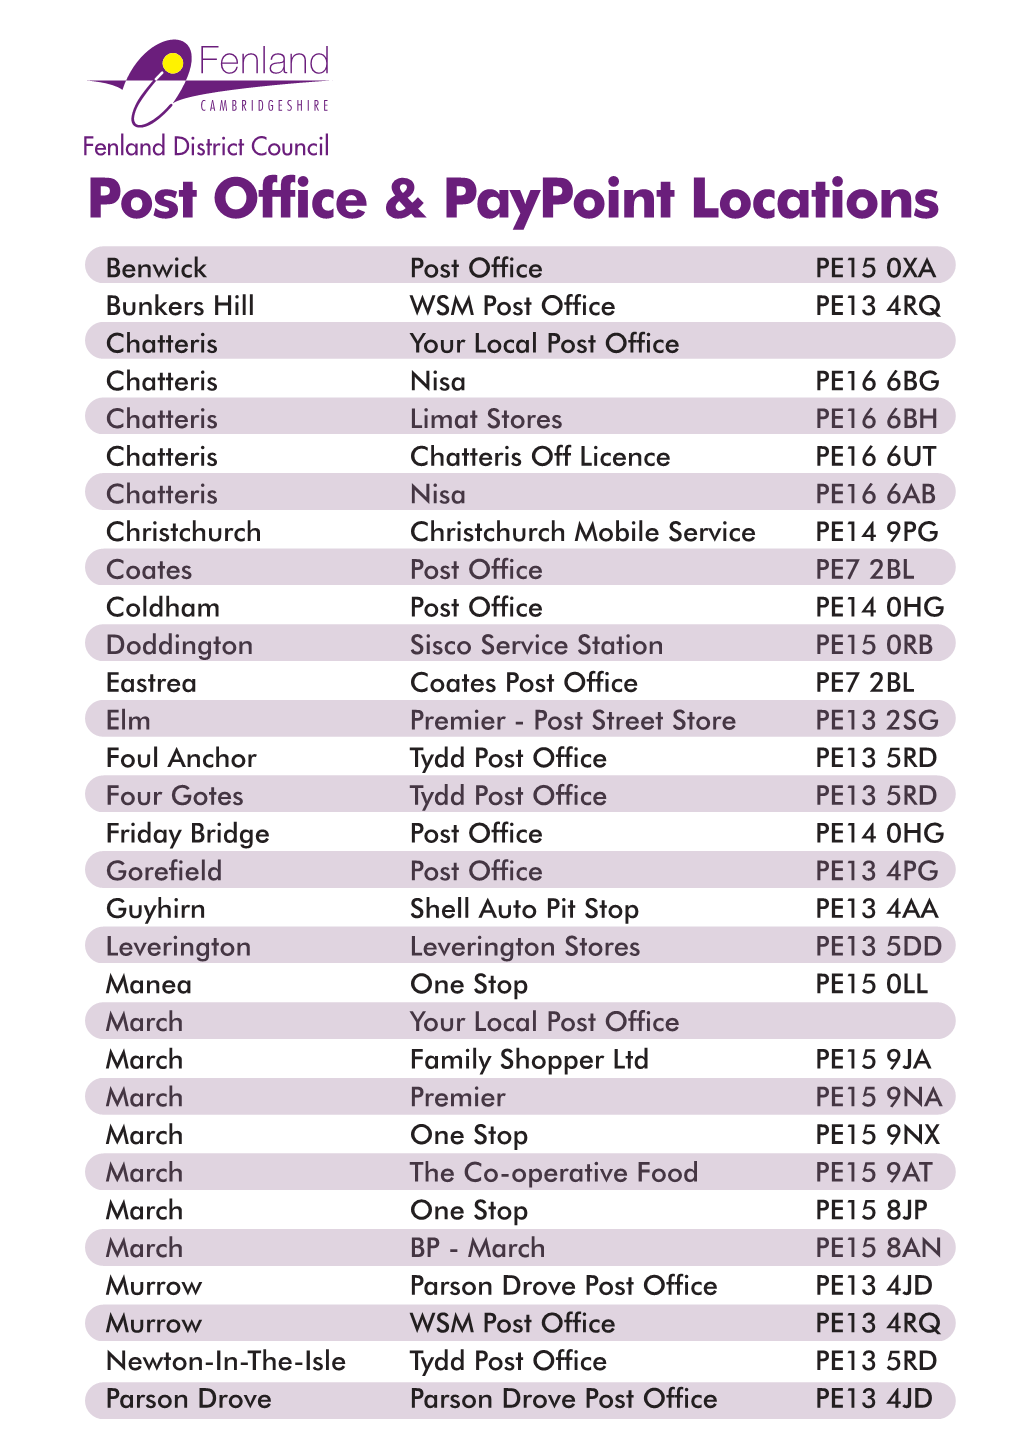 Post Office and Paypoint Locations